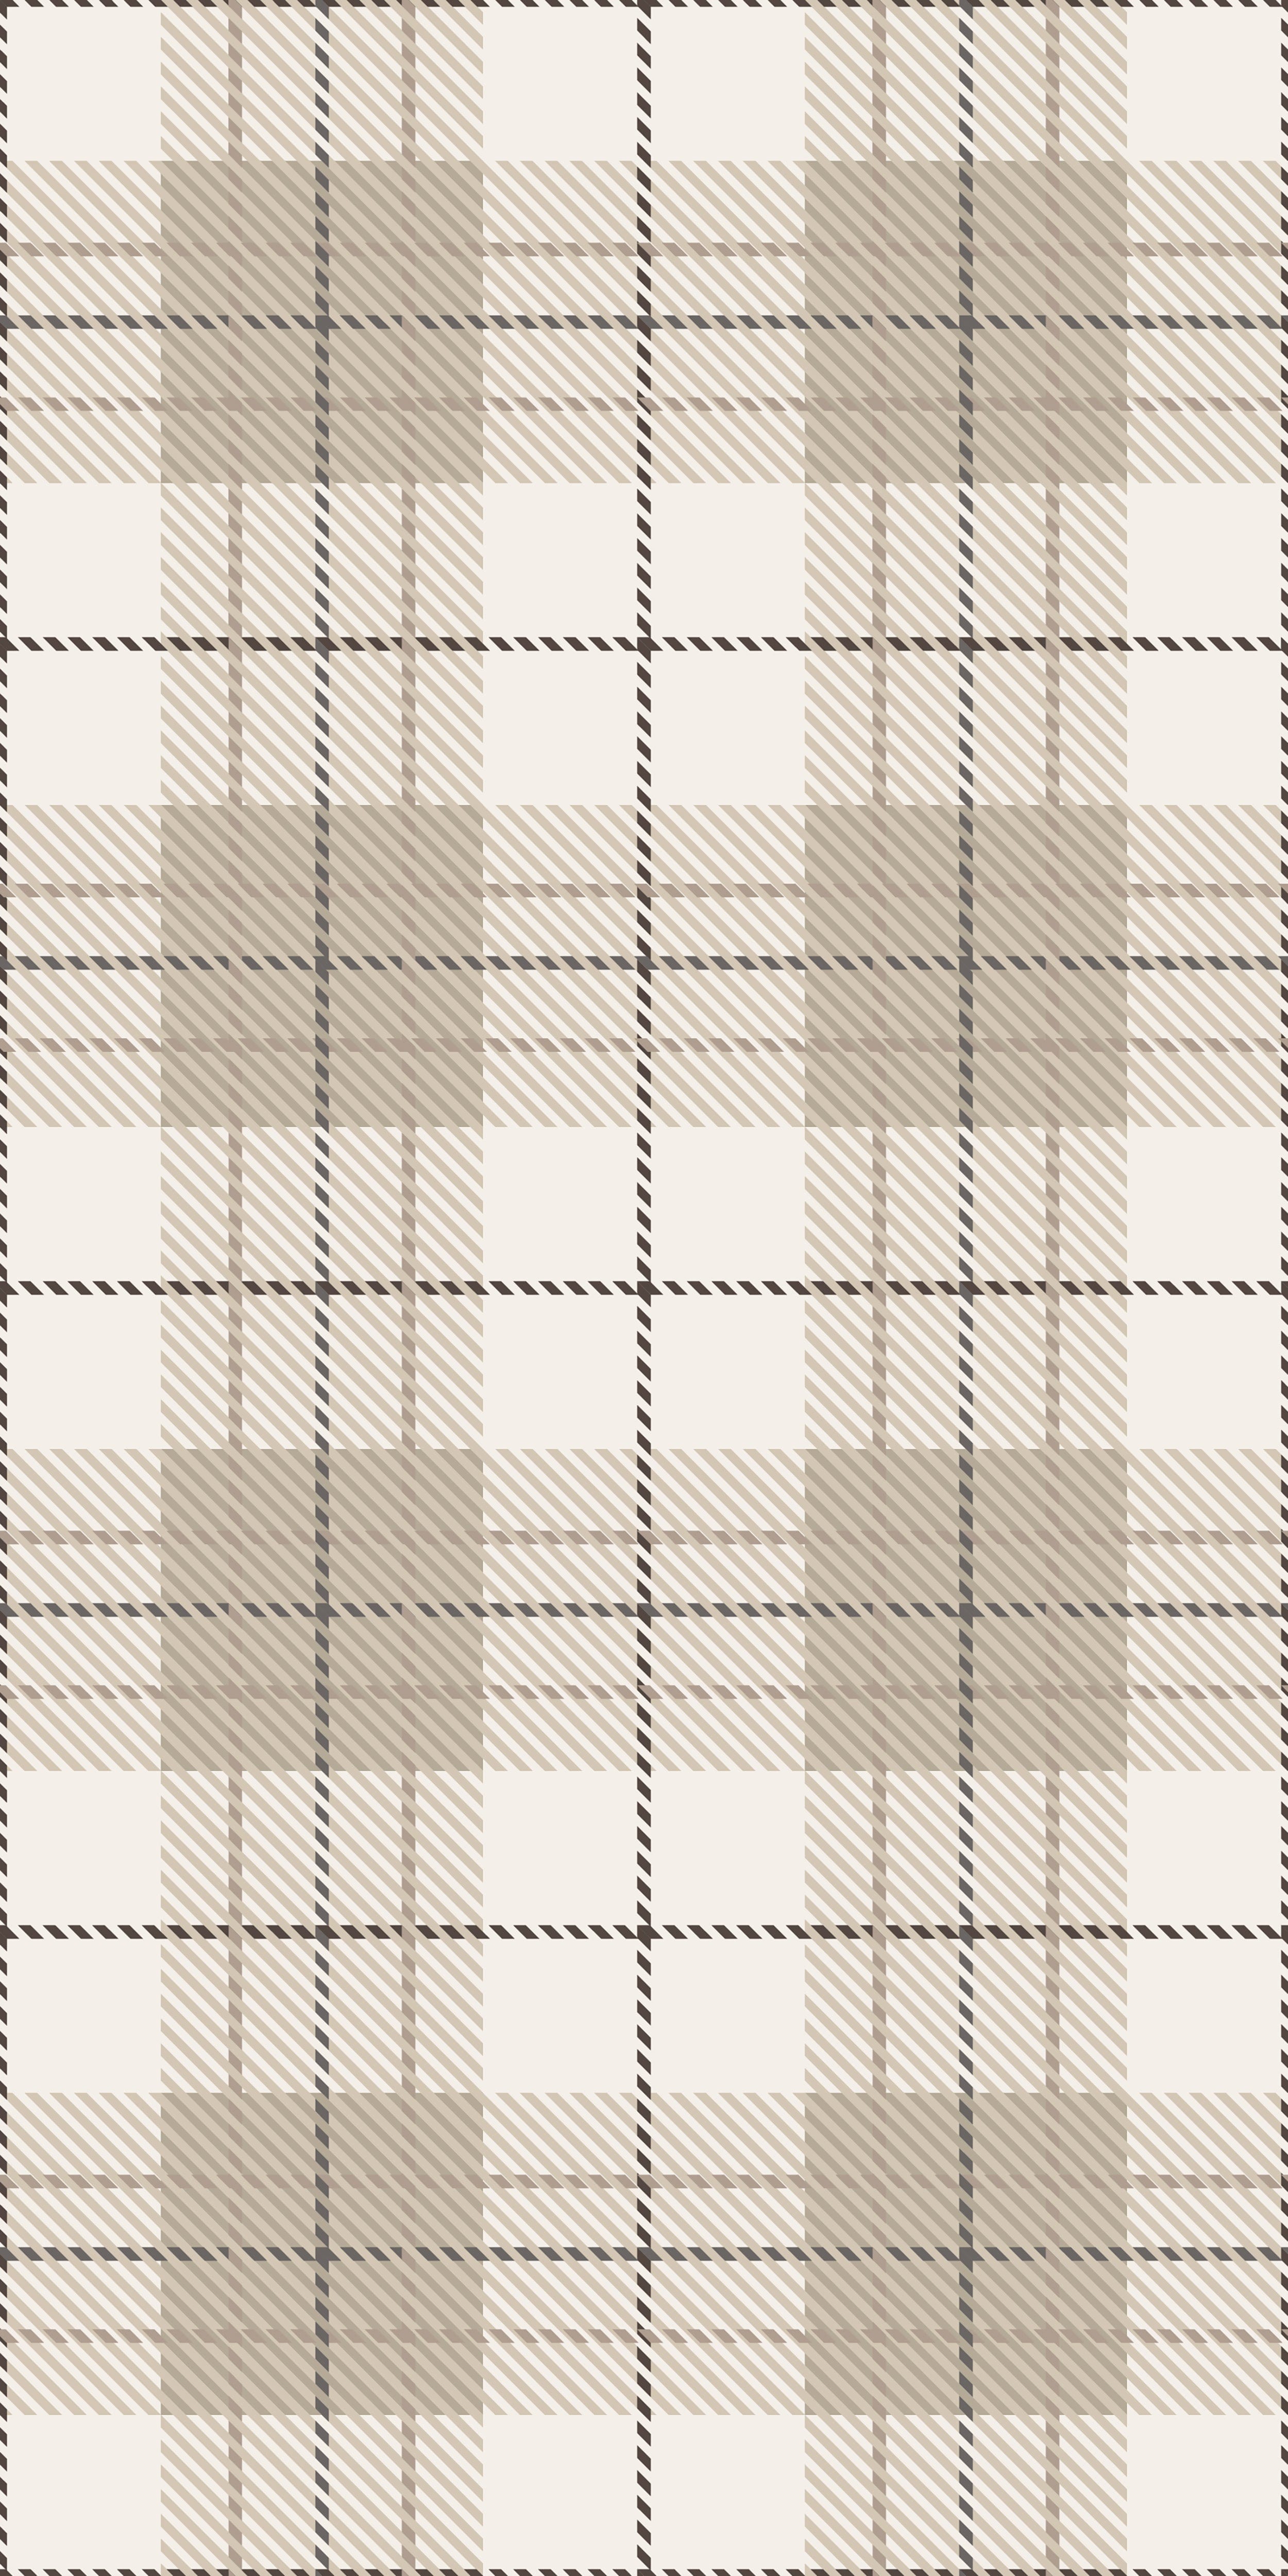 A close-up of the Winter Plaid Wallpaper, showing the detailed pattern with beige and white checks intersected by fine black stripes. The design evokes the comforting textiles of winter apparel, suitable for creating a cozy atmosphere in any interior.